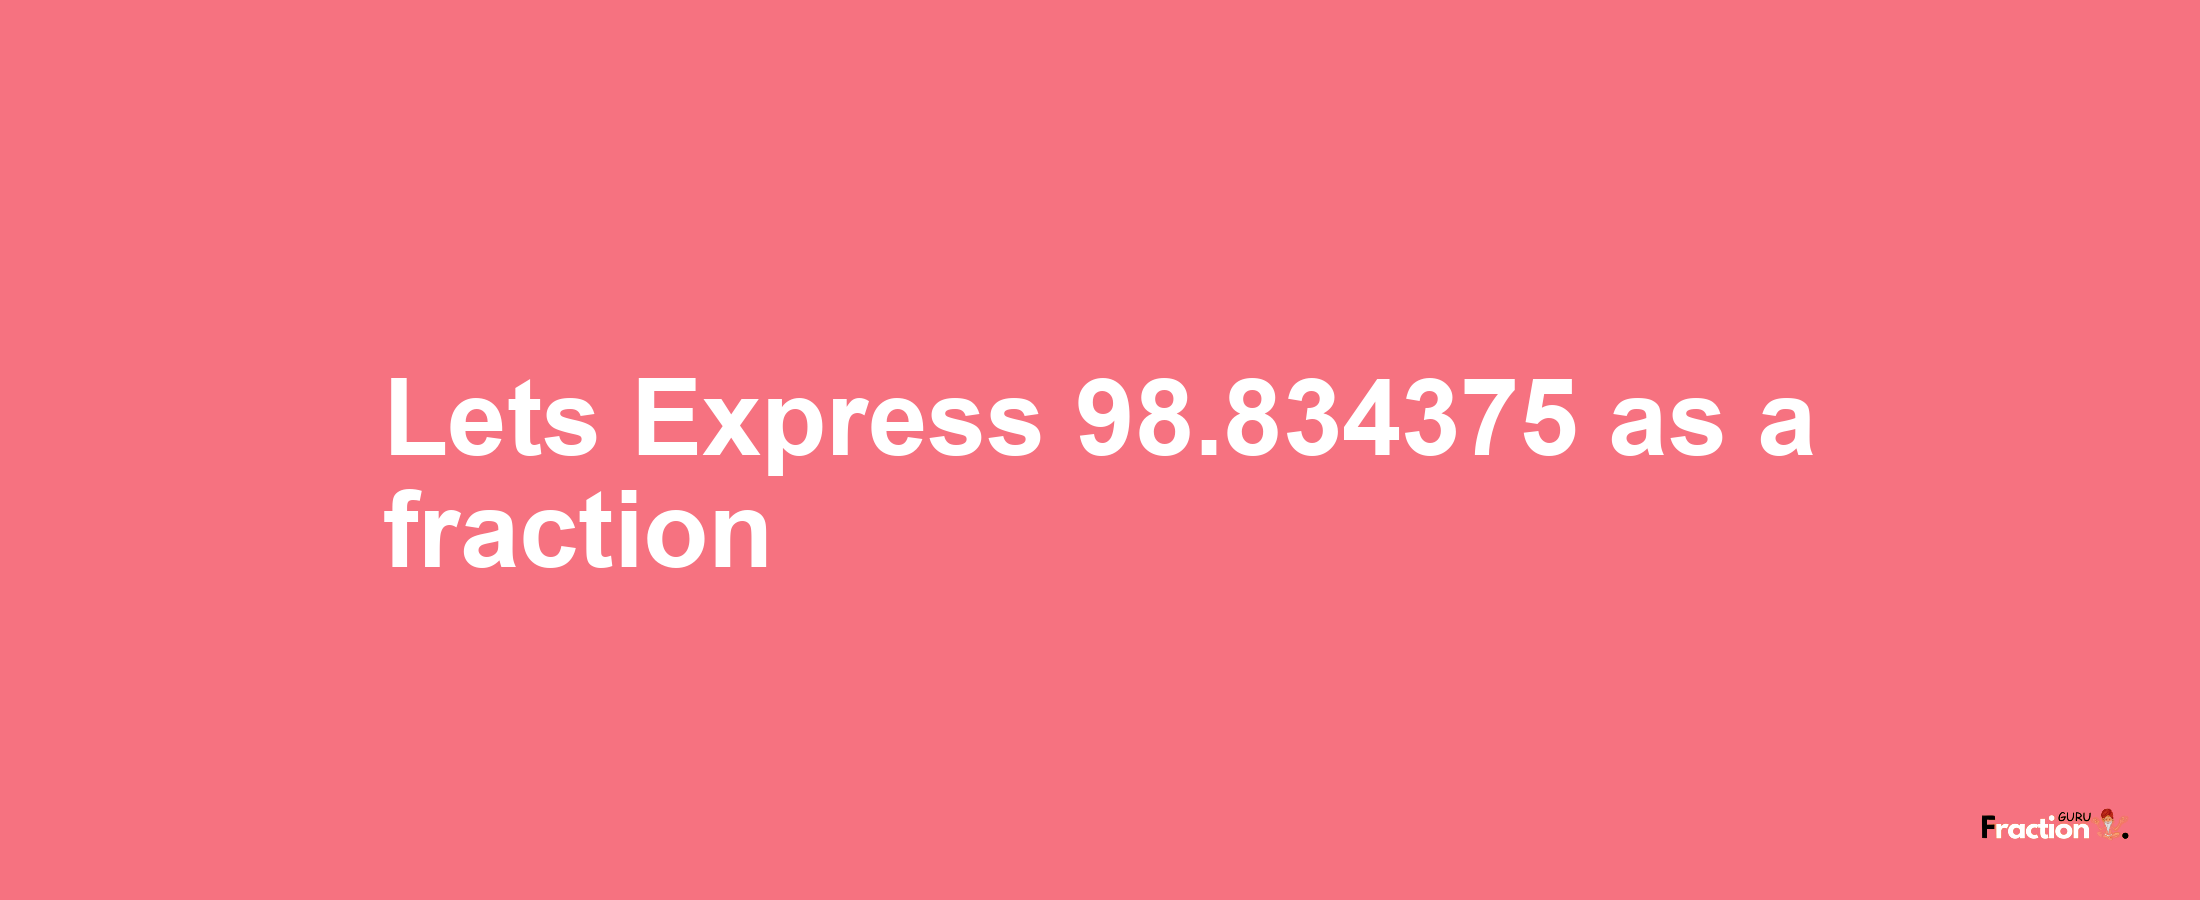 Lets Express 98.834375 as afraction